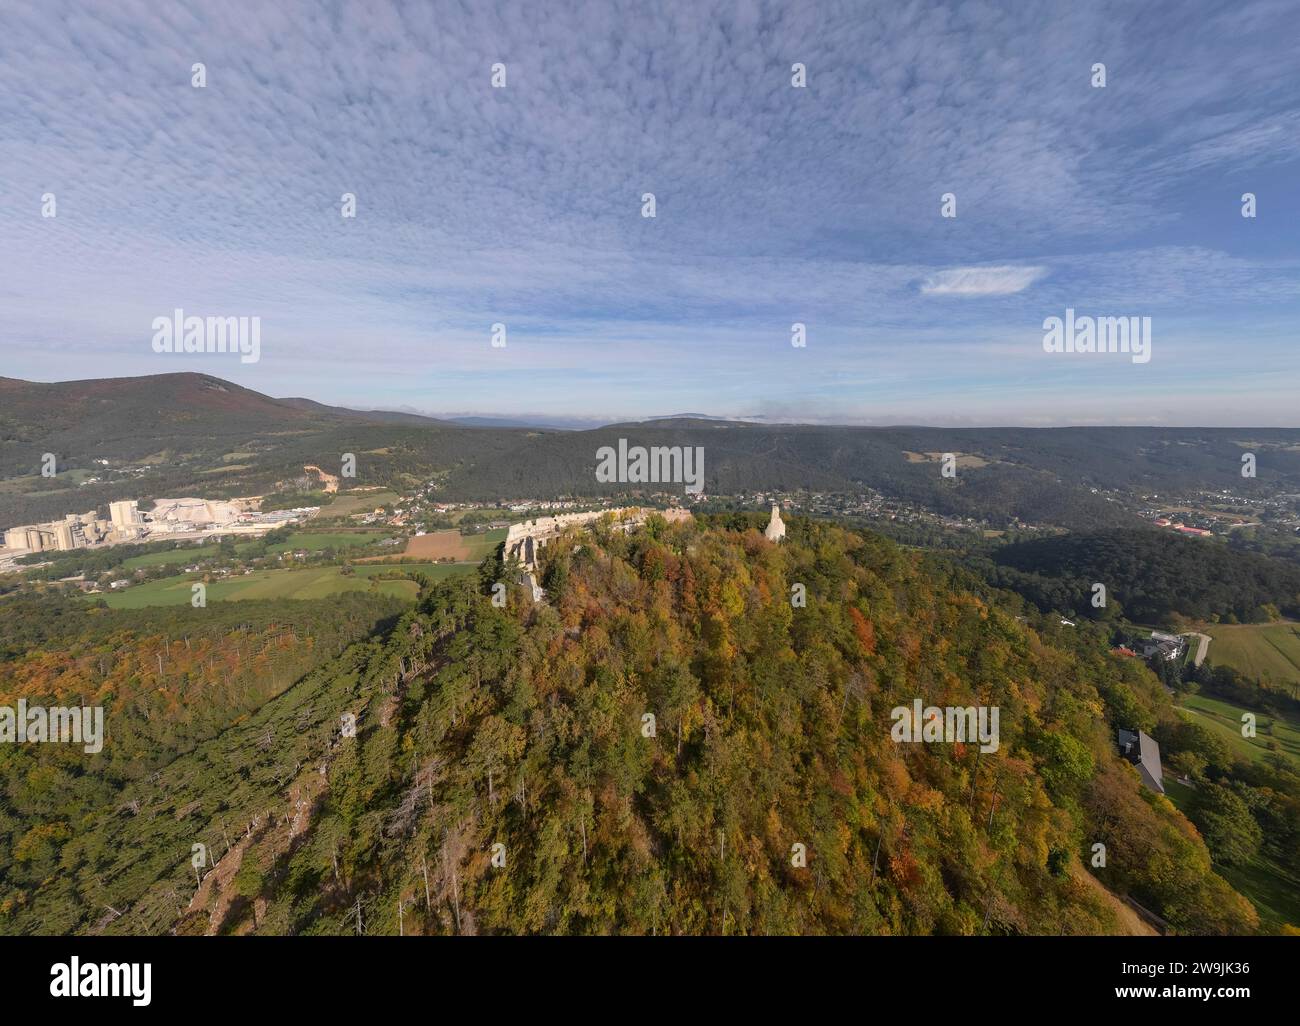 Aerial view of the Starhemberg ruins and the Wopfing cement works in the background, Markt Piesting, Lower Austria, Austria Stock Photo